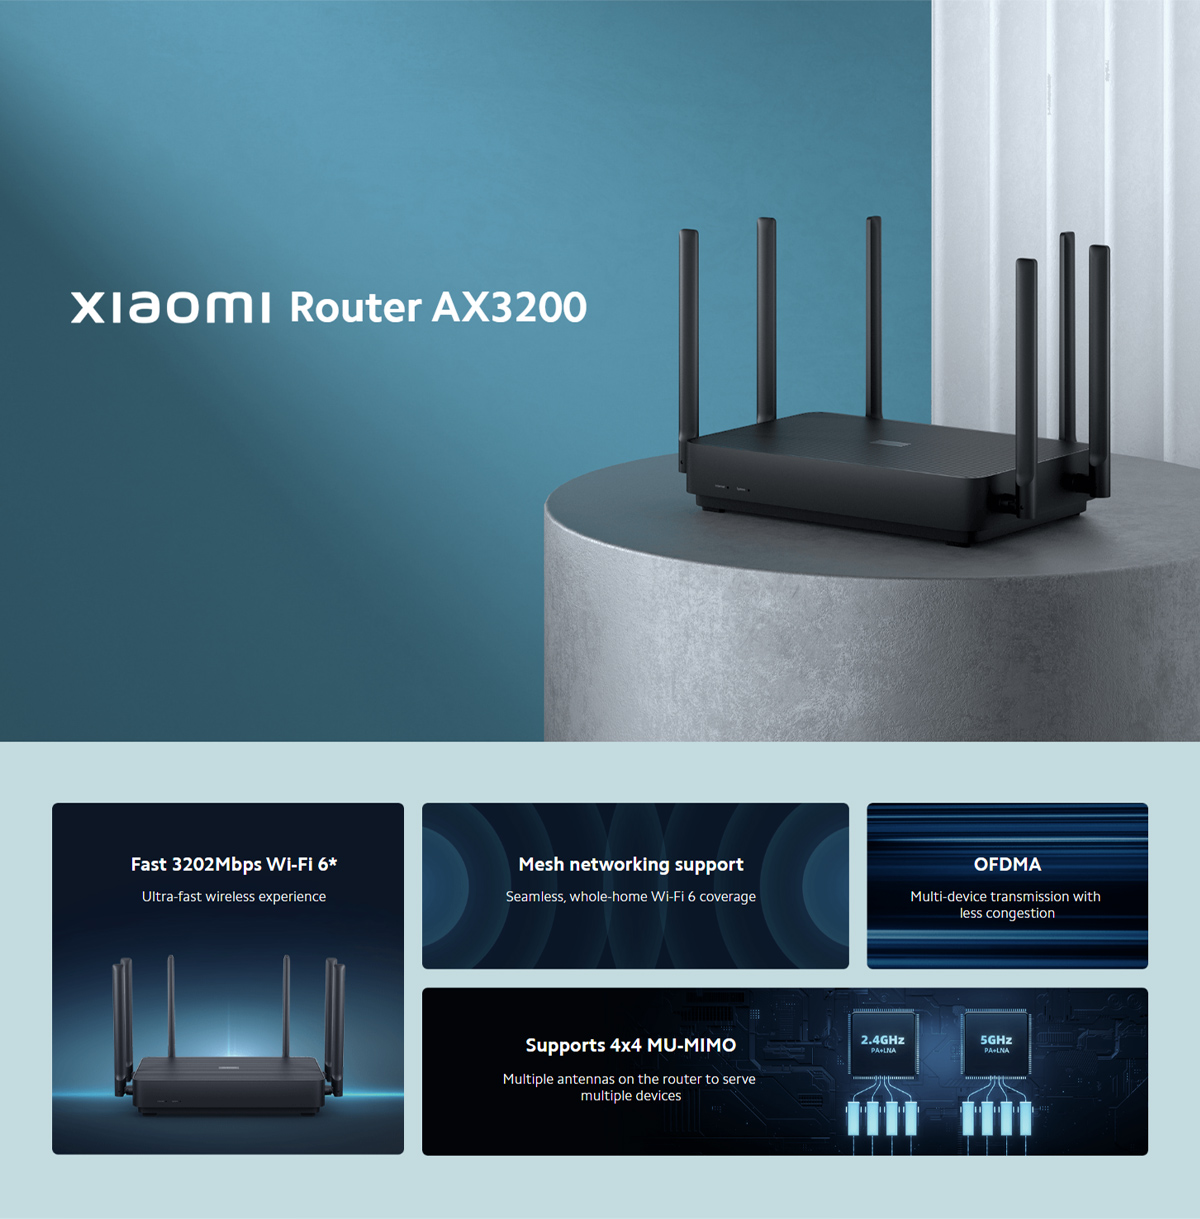 Xiaomi-AX3200-Wireless-3202Mbps-Wi-Fi6-Router-Mesh-Networking-WiFi-Repeater-Dual-Band-256MB-of-Memor-1906060-1